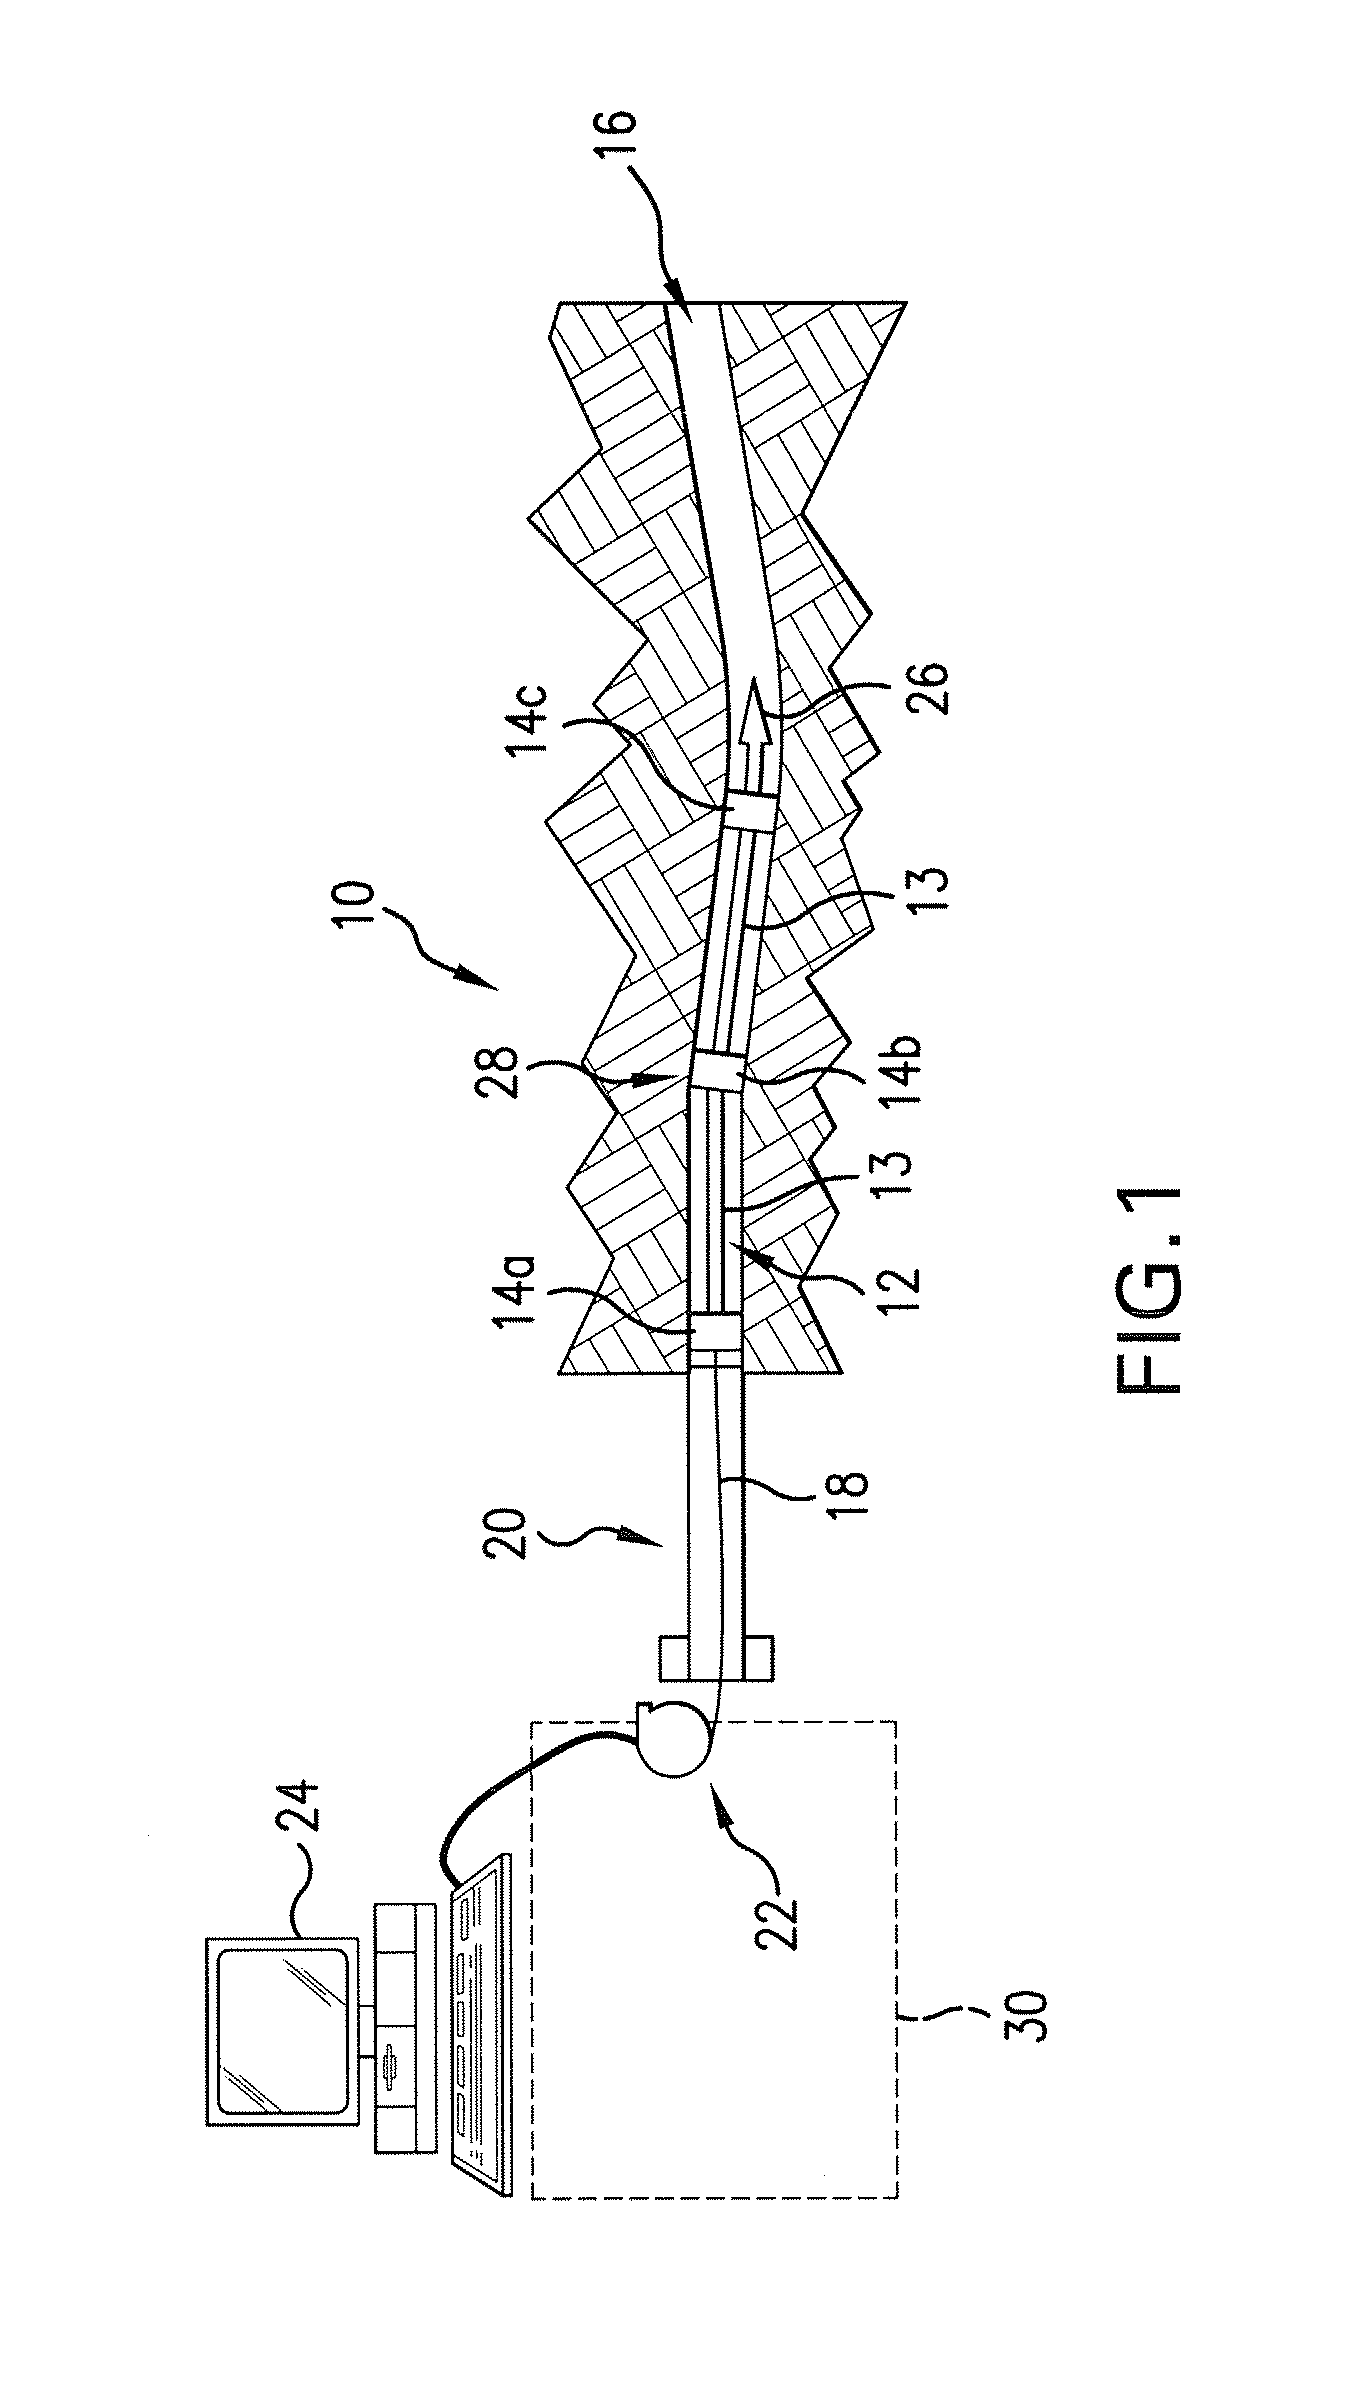 Centralizer-based survey and navigation device and method